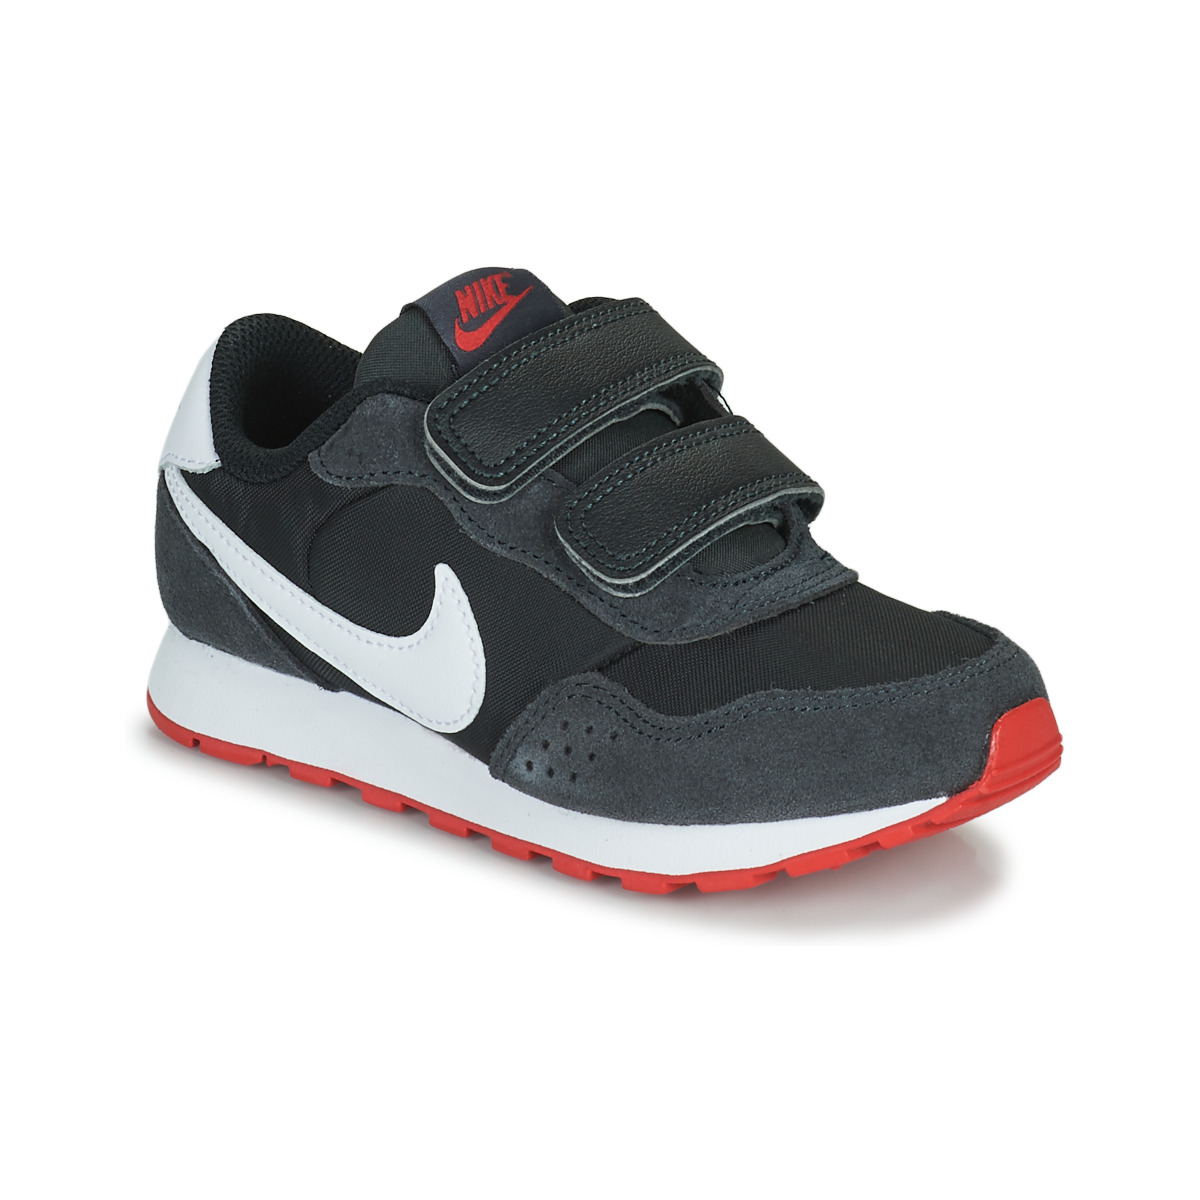 Shoes Children Low top trainers Nike NIKE MD VALIANT (PSV) Black / White